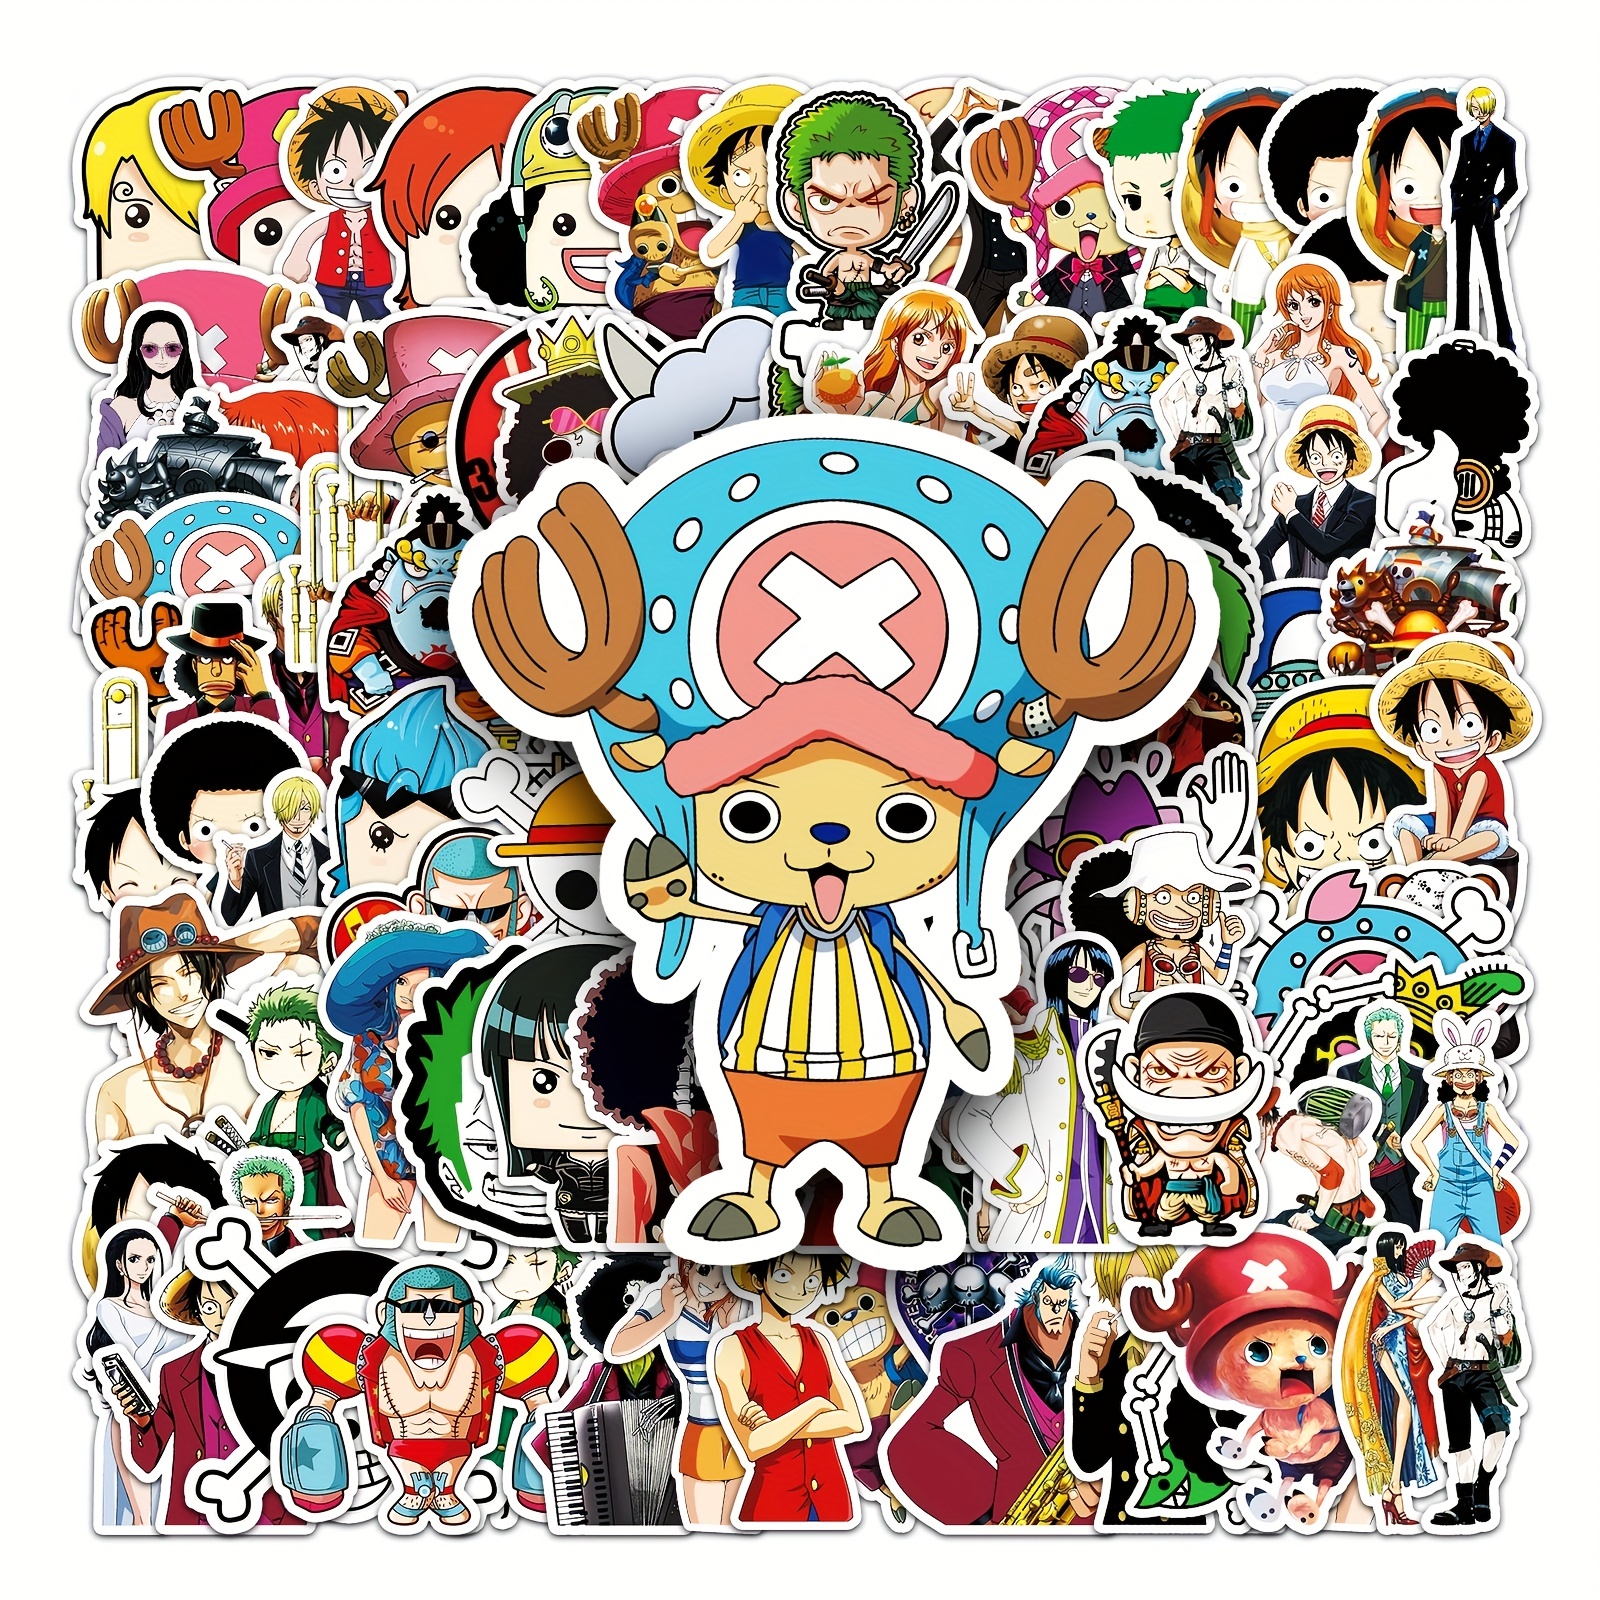 106 Unique Anime Stickers - Waterproof & Durable - Perfect for Skateboards,  Luggage & DIY Projects!